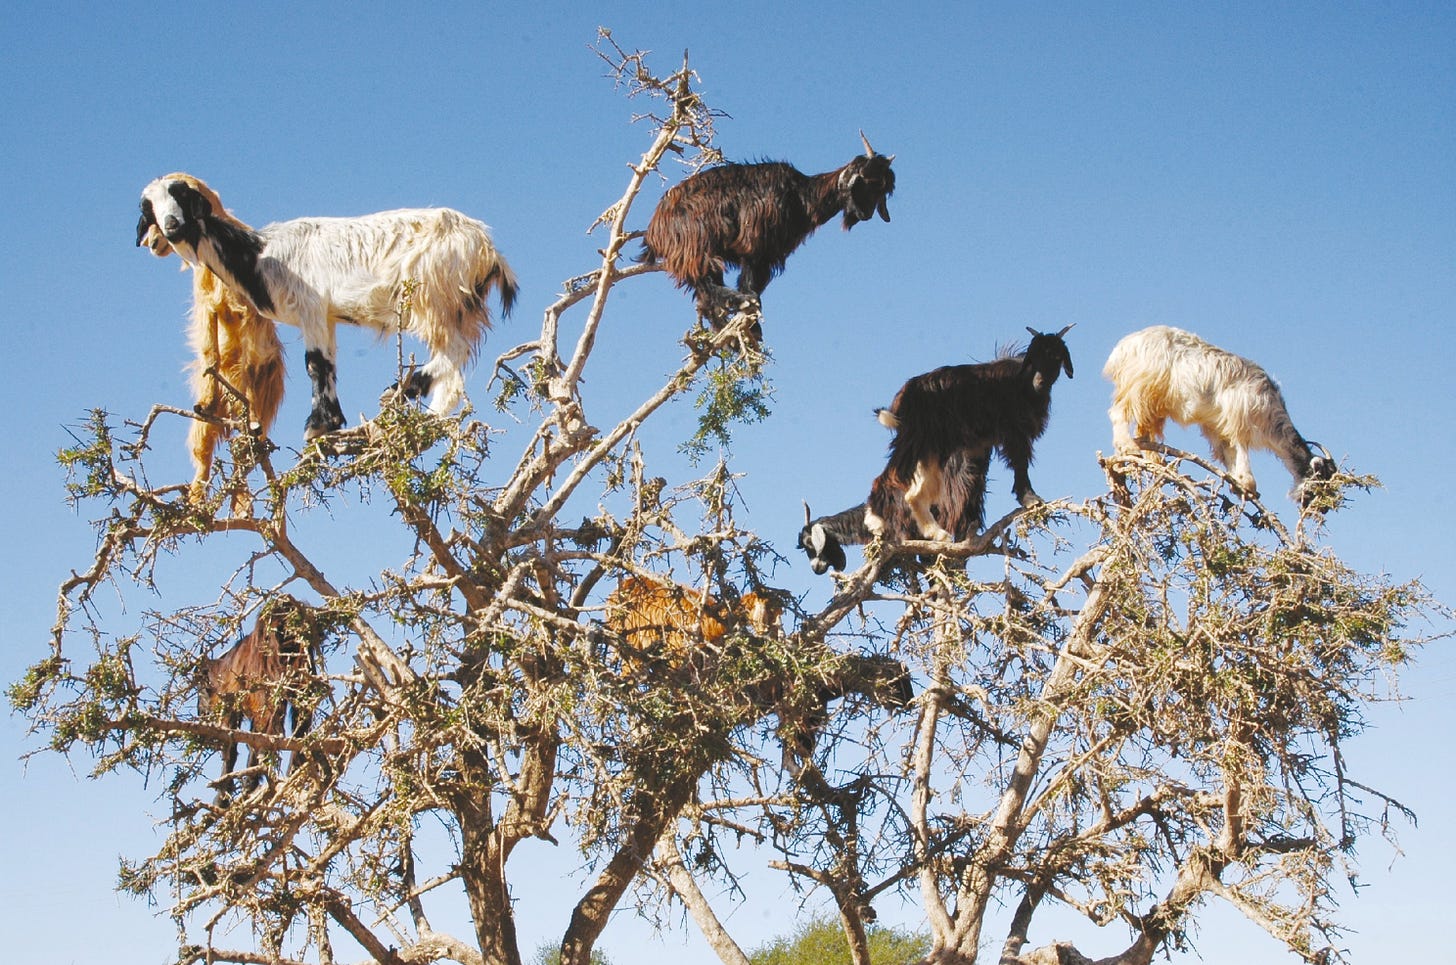 Several shaggy goats of multiple colors who have climbed into the topmost branches of a tree to eat the leaves.